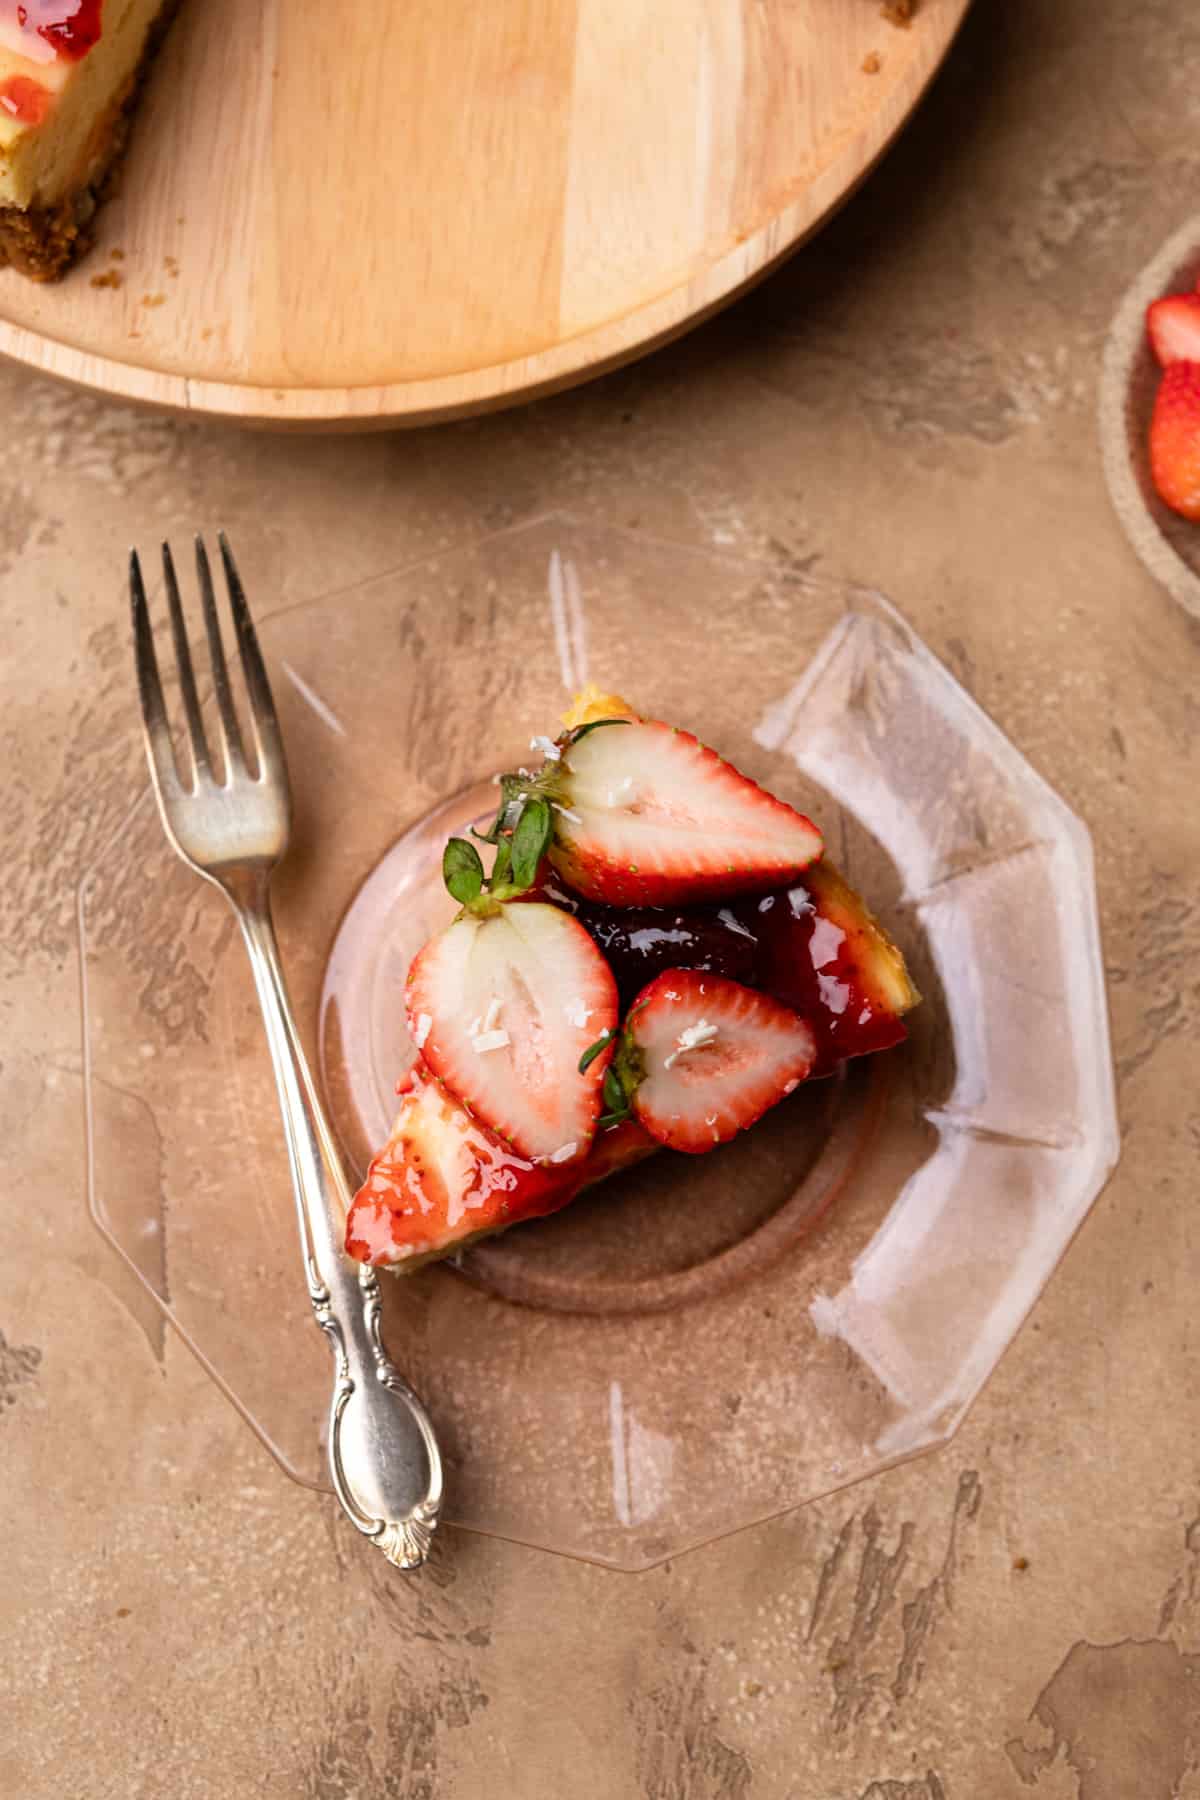 A slice of cheesecake topped with strawberries on a beige surface.